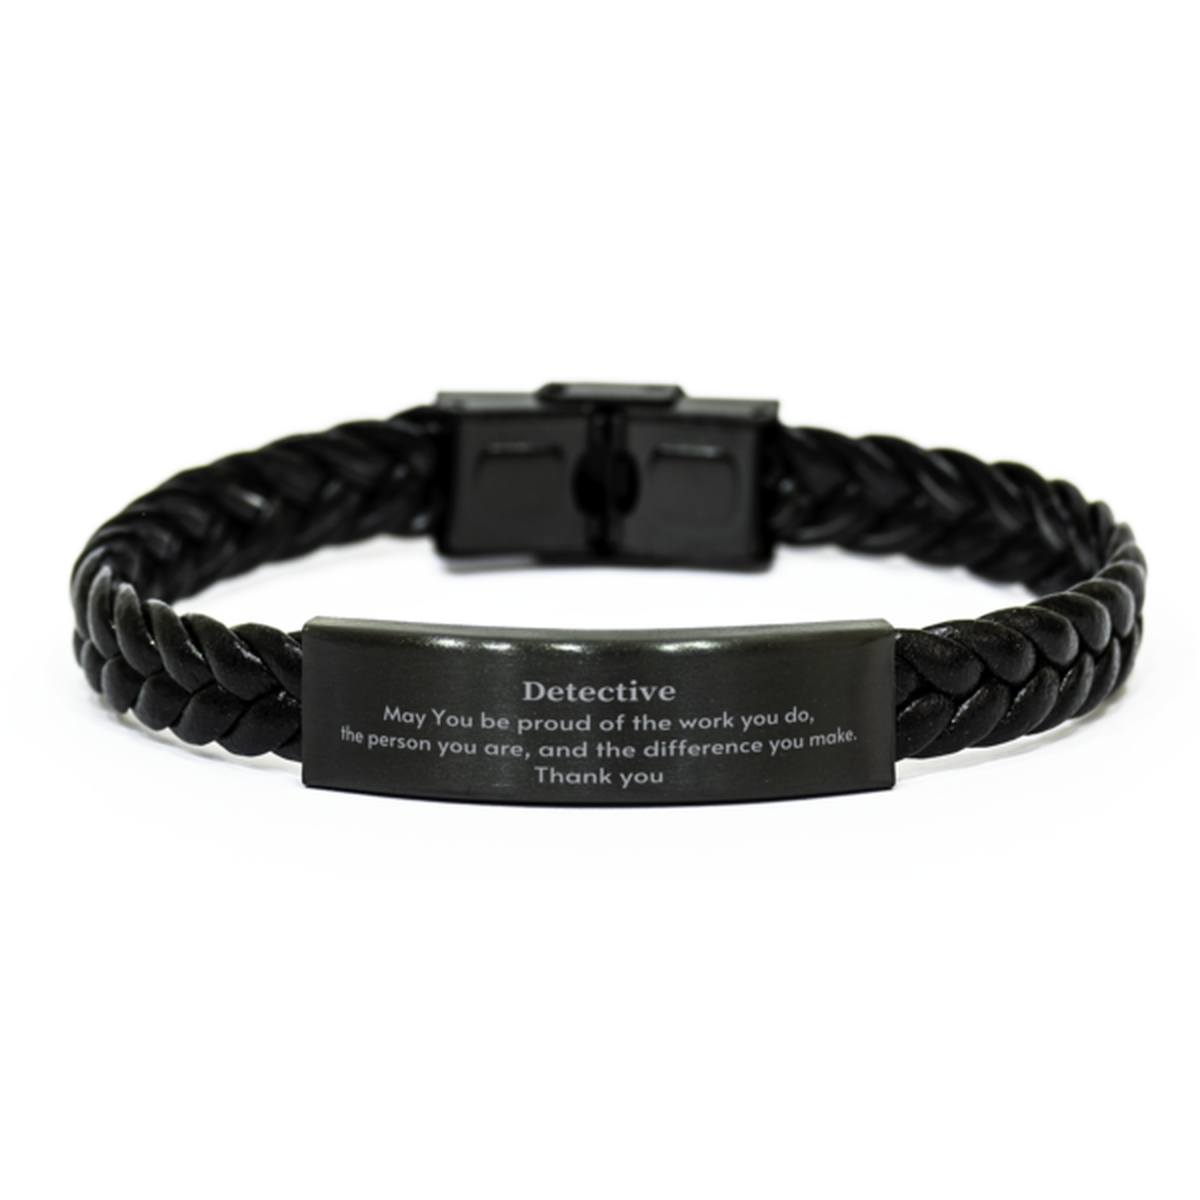 Heartwarming Braided Leather Bracelet Retirement Coworkers Gifts for Detective, Detective May You be proud of the work you do, the person you are Gifts for Boss Men Women Friends